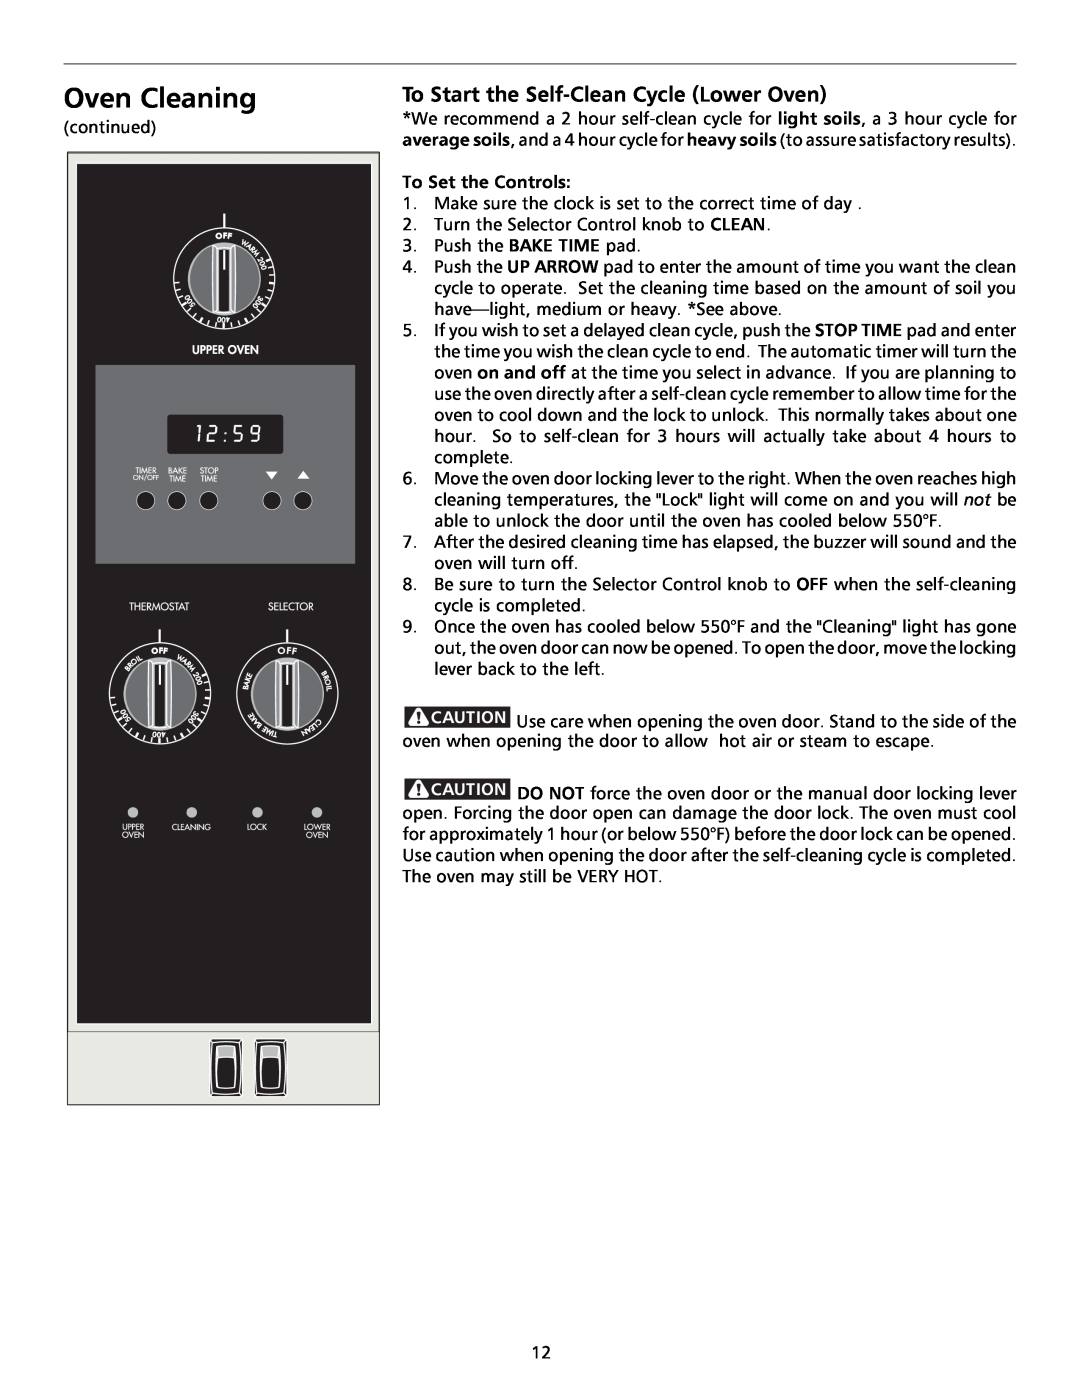 Tappan 316000191 manual Oven Cleaning, To Start the Self-Clean Cycle Lower Oven, To Set the Controls 